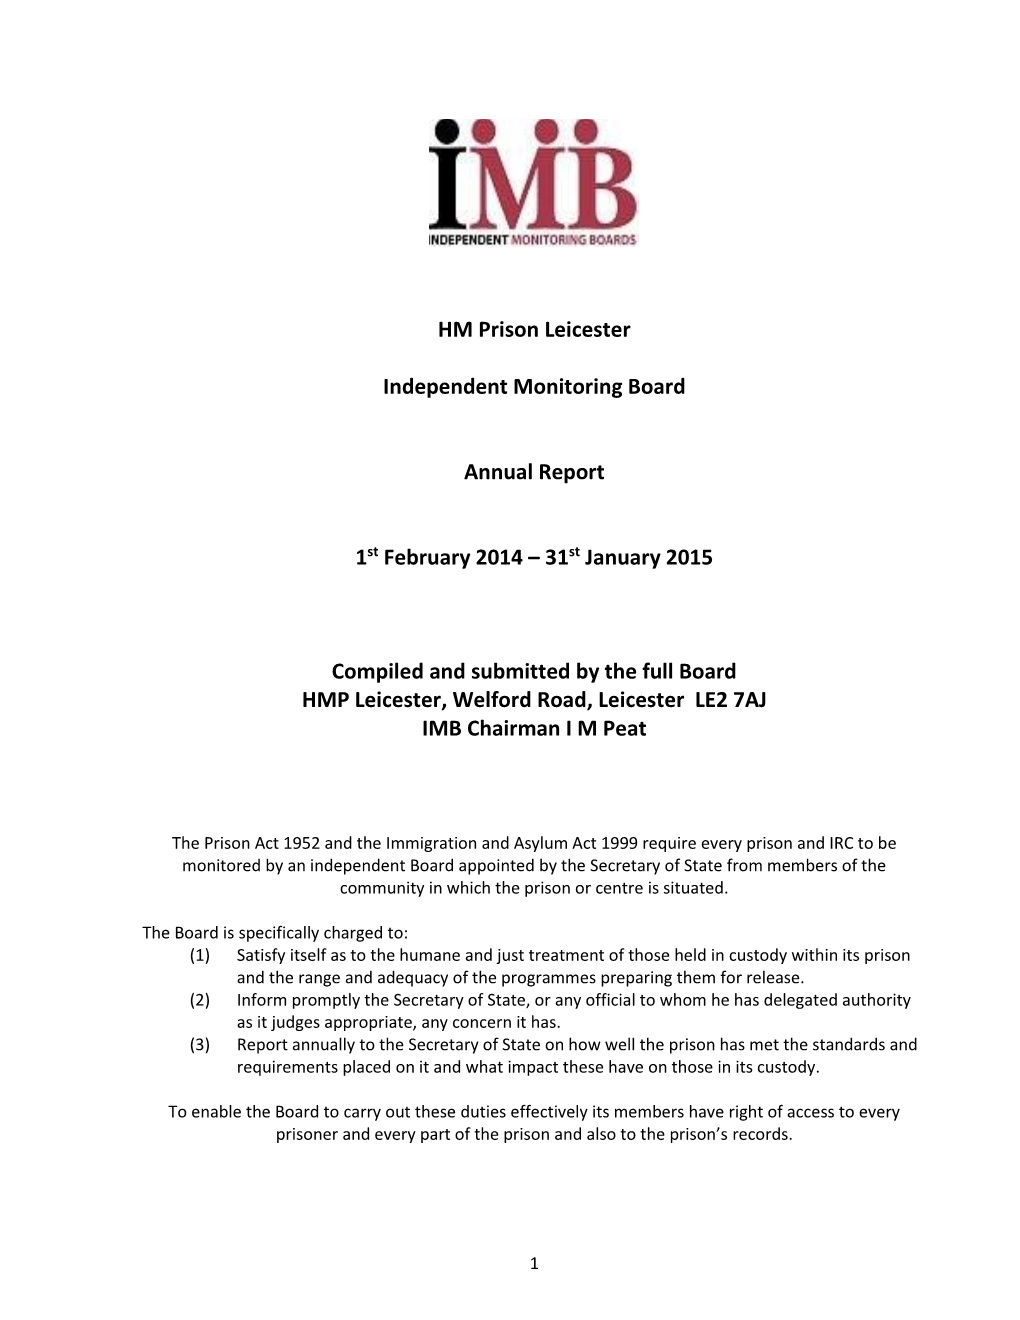 HM Prison Leicester Independent Monitoring Board Annual Report 1St